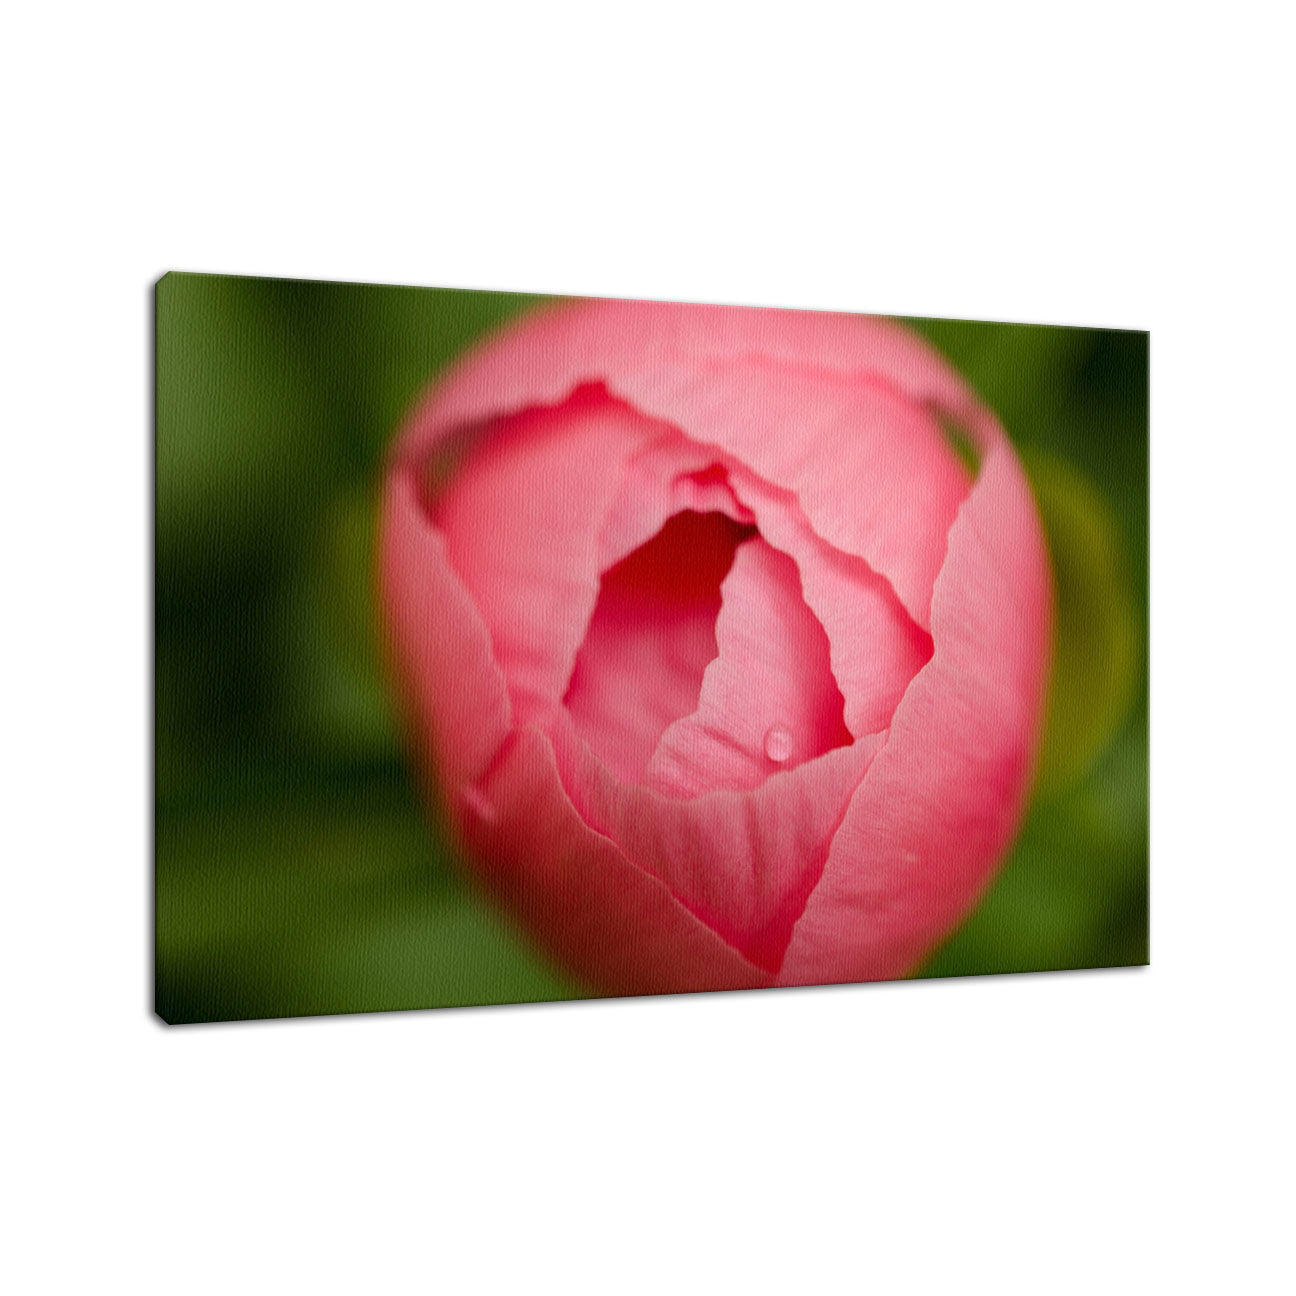 Peony Bud Nature / Floral Photo Fine Art Canvas Wall Art Prints  - PIPAFINEART